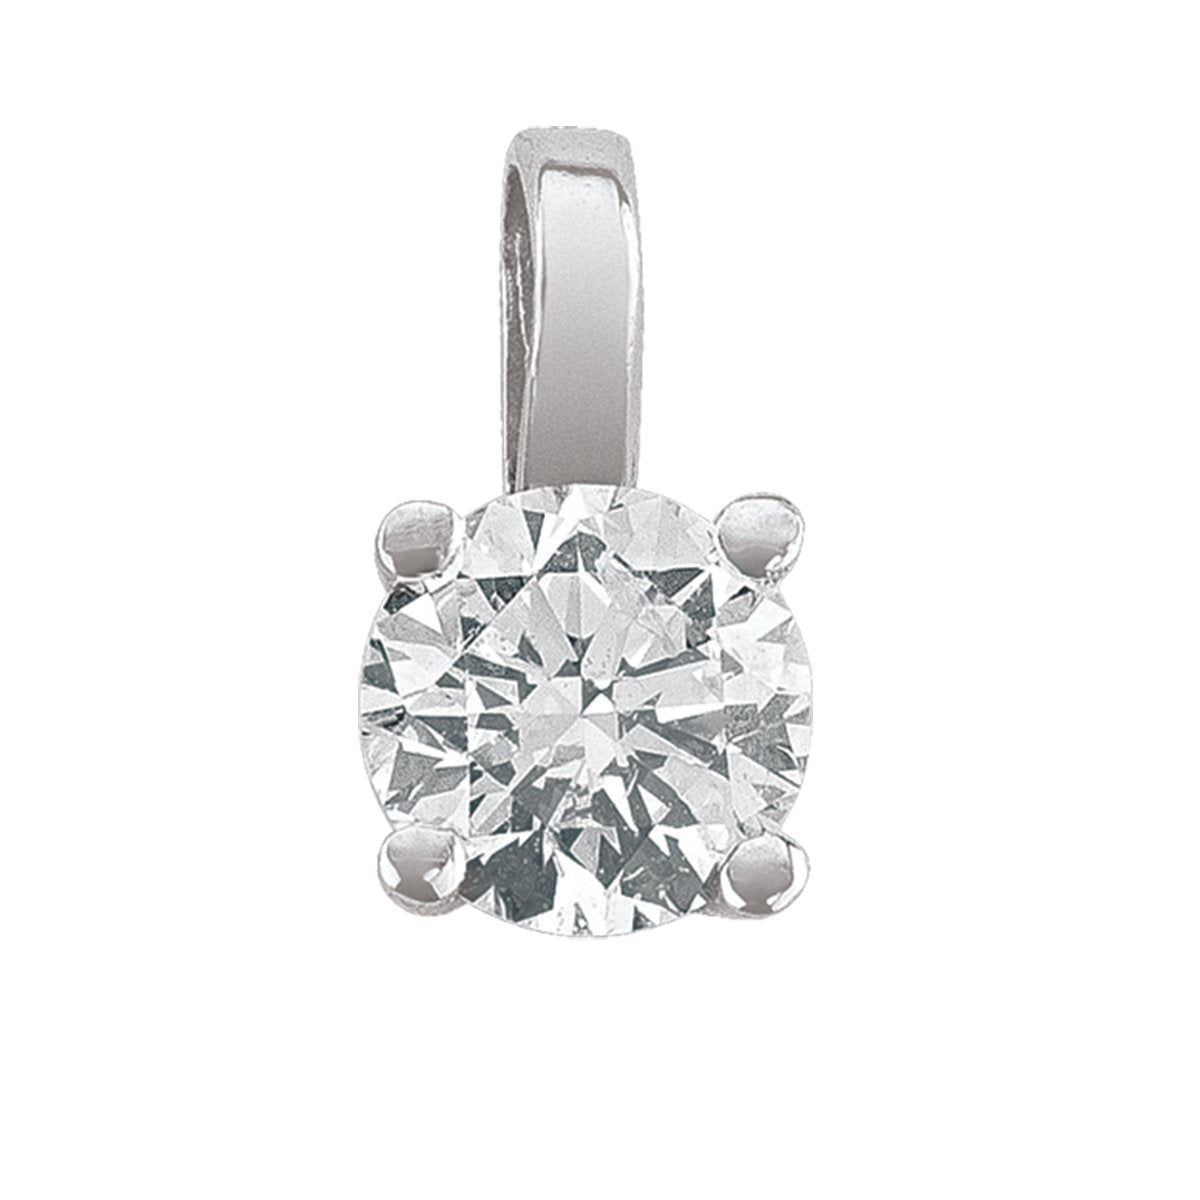 DIAMOND SOLITAIRES DIAMOND 4-CLAW SOLITAIRE PENDANTS (AVAILABLE IN VARIOUS STONE SIZE).